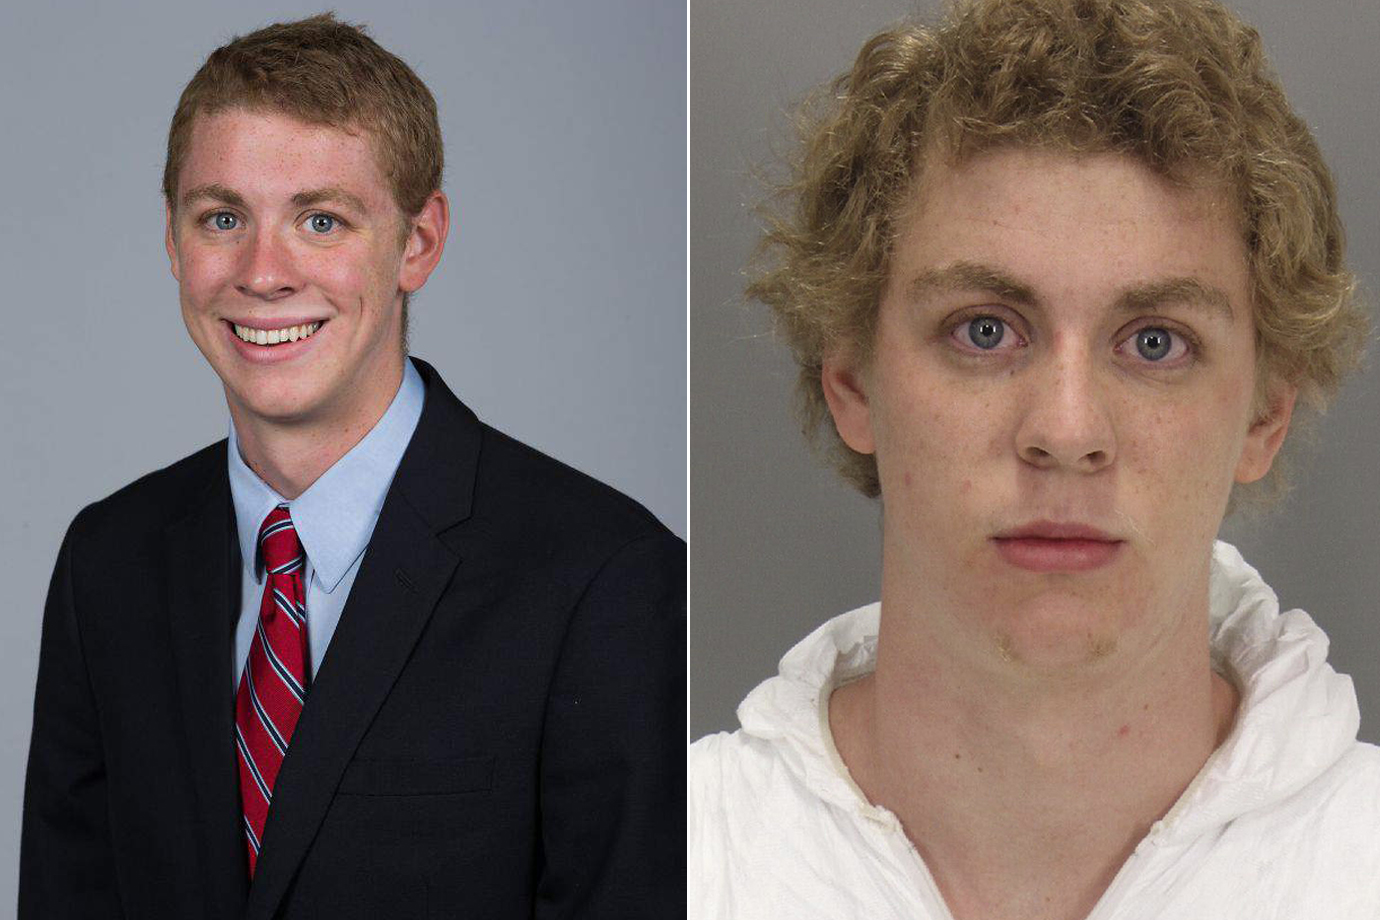 A composite image showing a Stanford University photo of Brock Turner (left) and Turner's January 2015 booking photo, released in June by the Santa Clara County Sheriff's Office. (Stanford University/Heavy.com / Santa Clara County Sheriff's Office/AP)